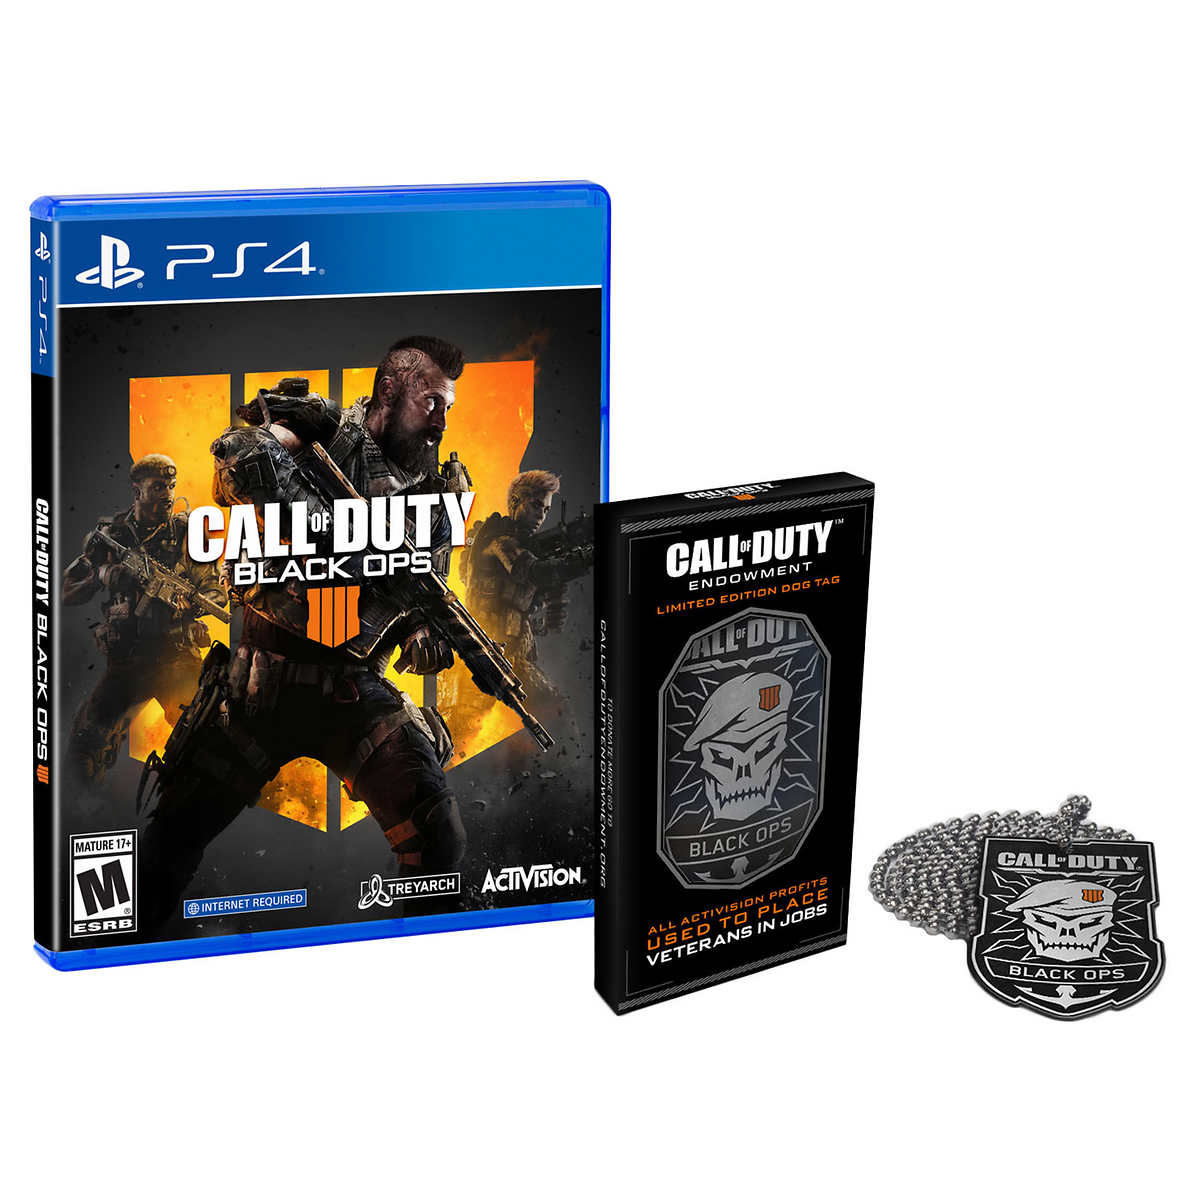 Call of Duty: Black Ops 4 (PS4)